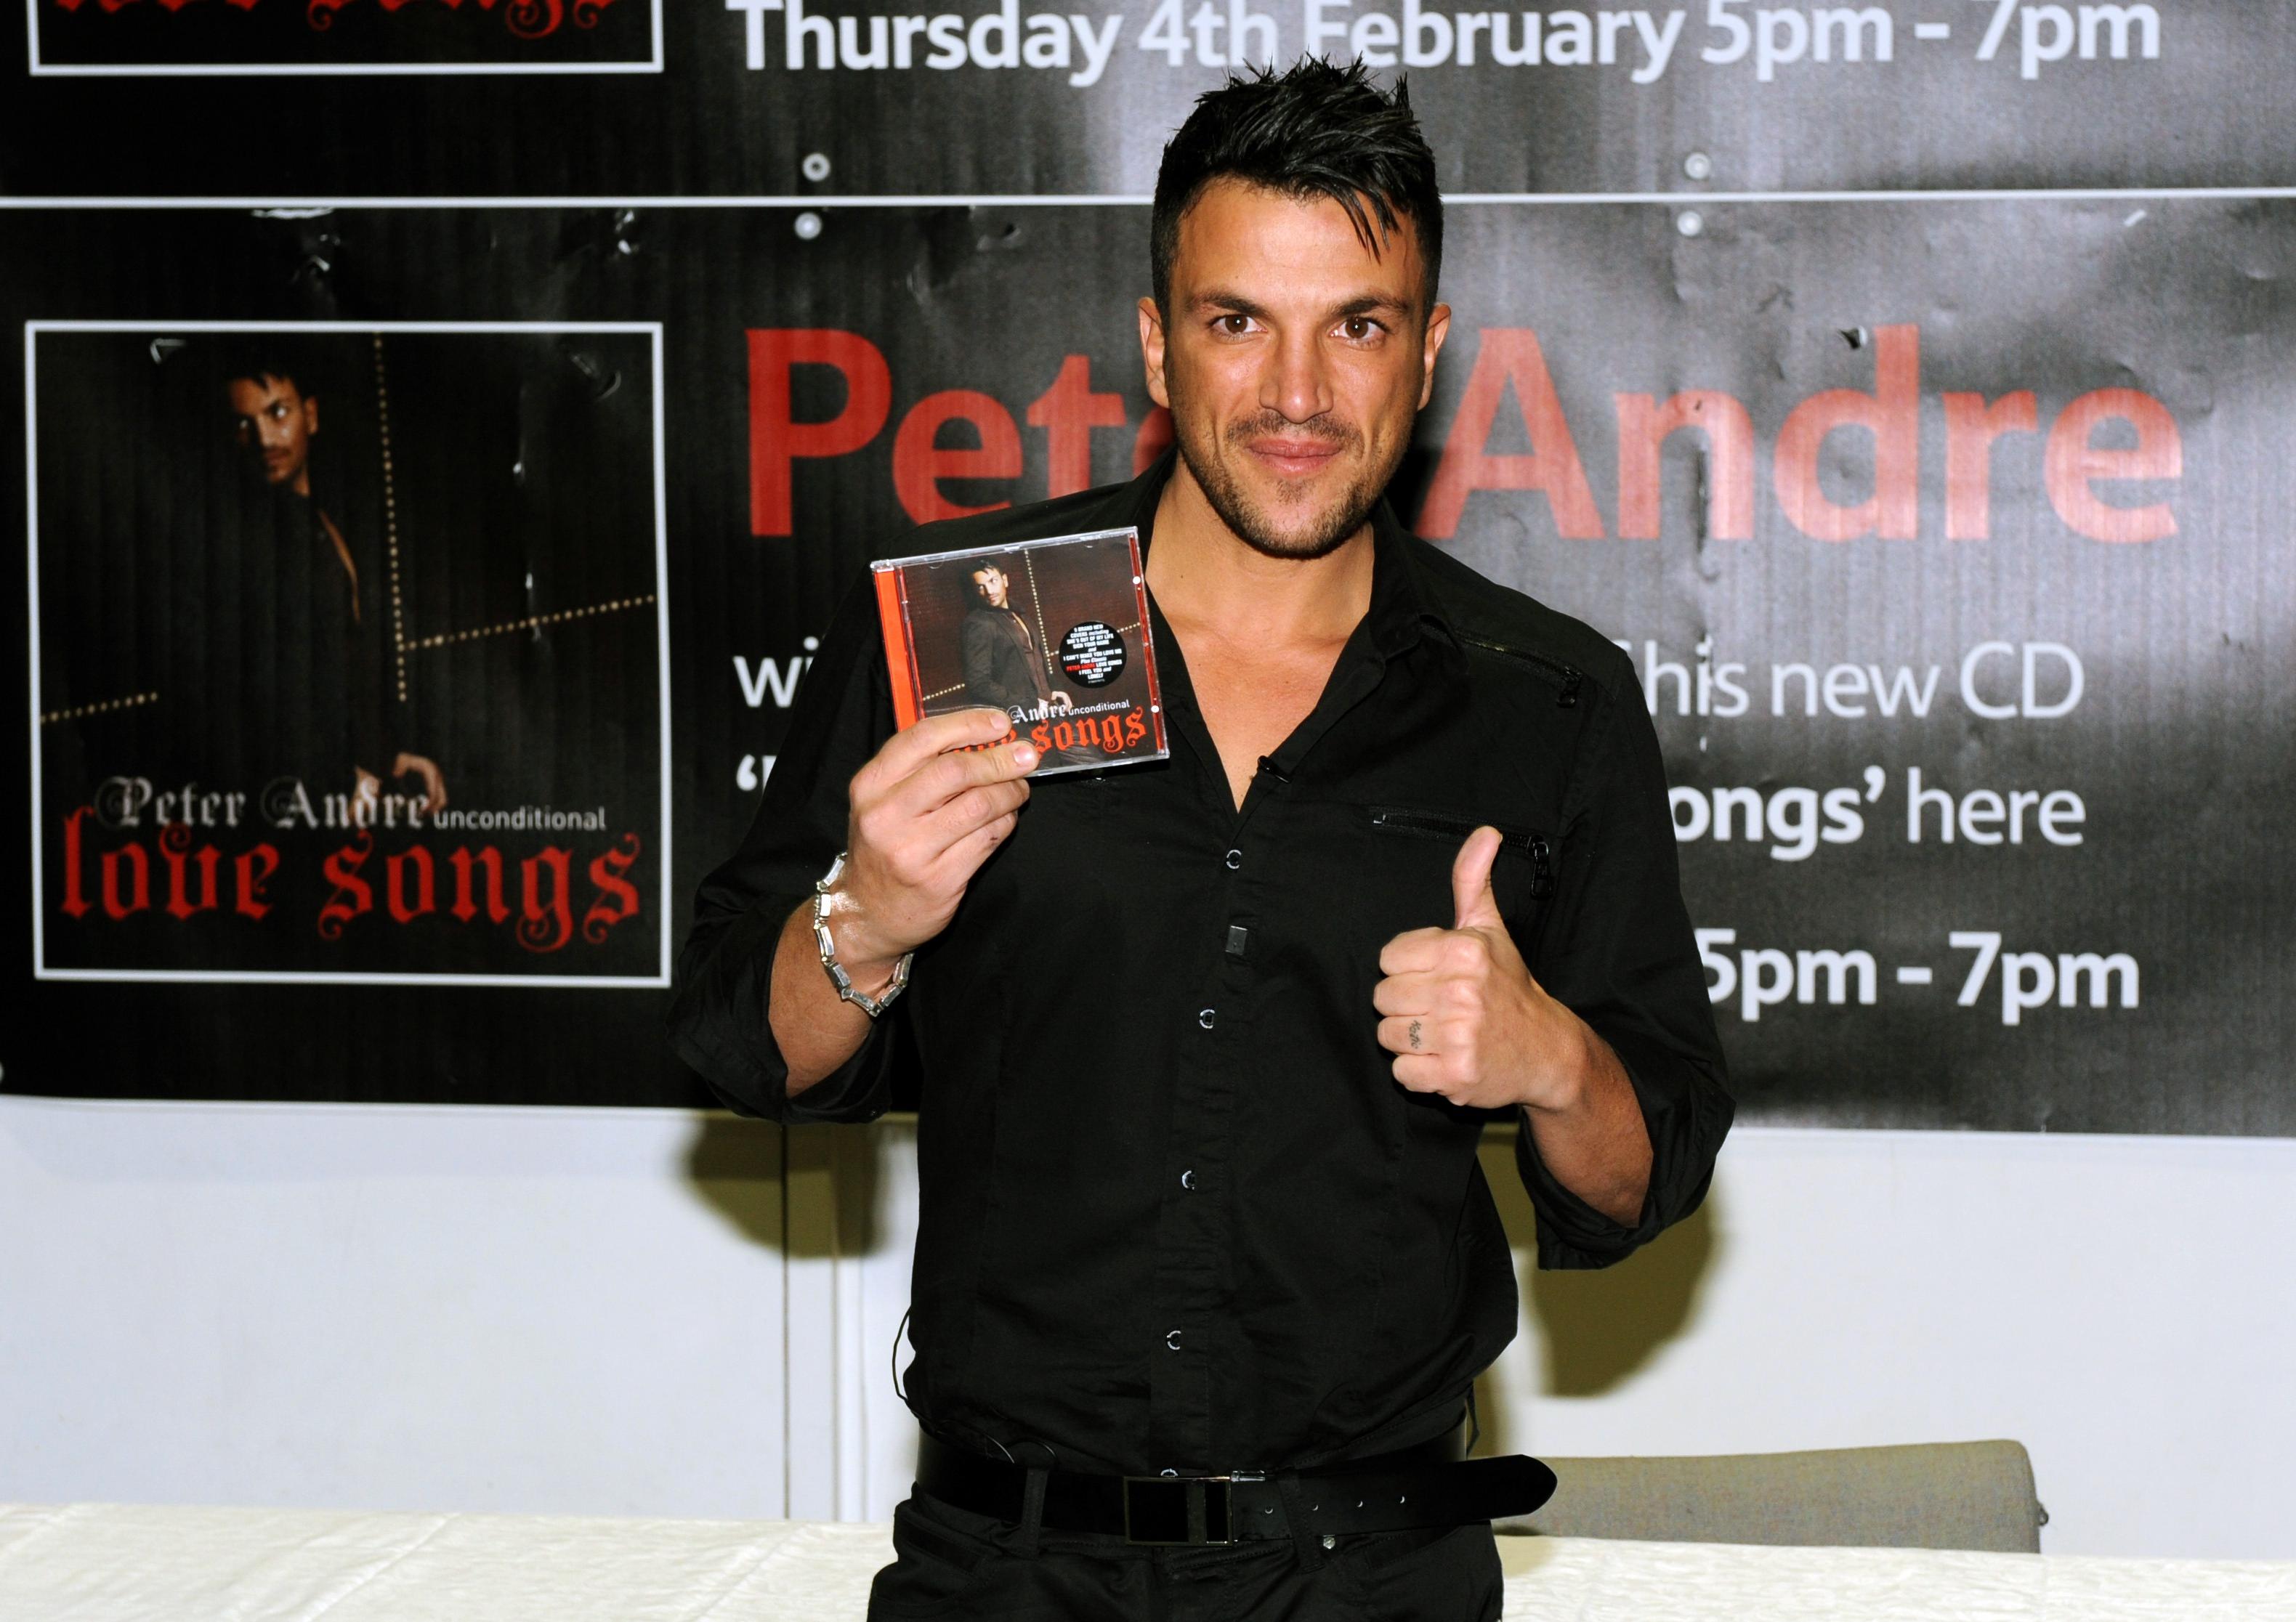 Peter Andre at the Holmbush Shopping centre. Picture by Stephen Goodger